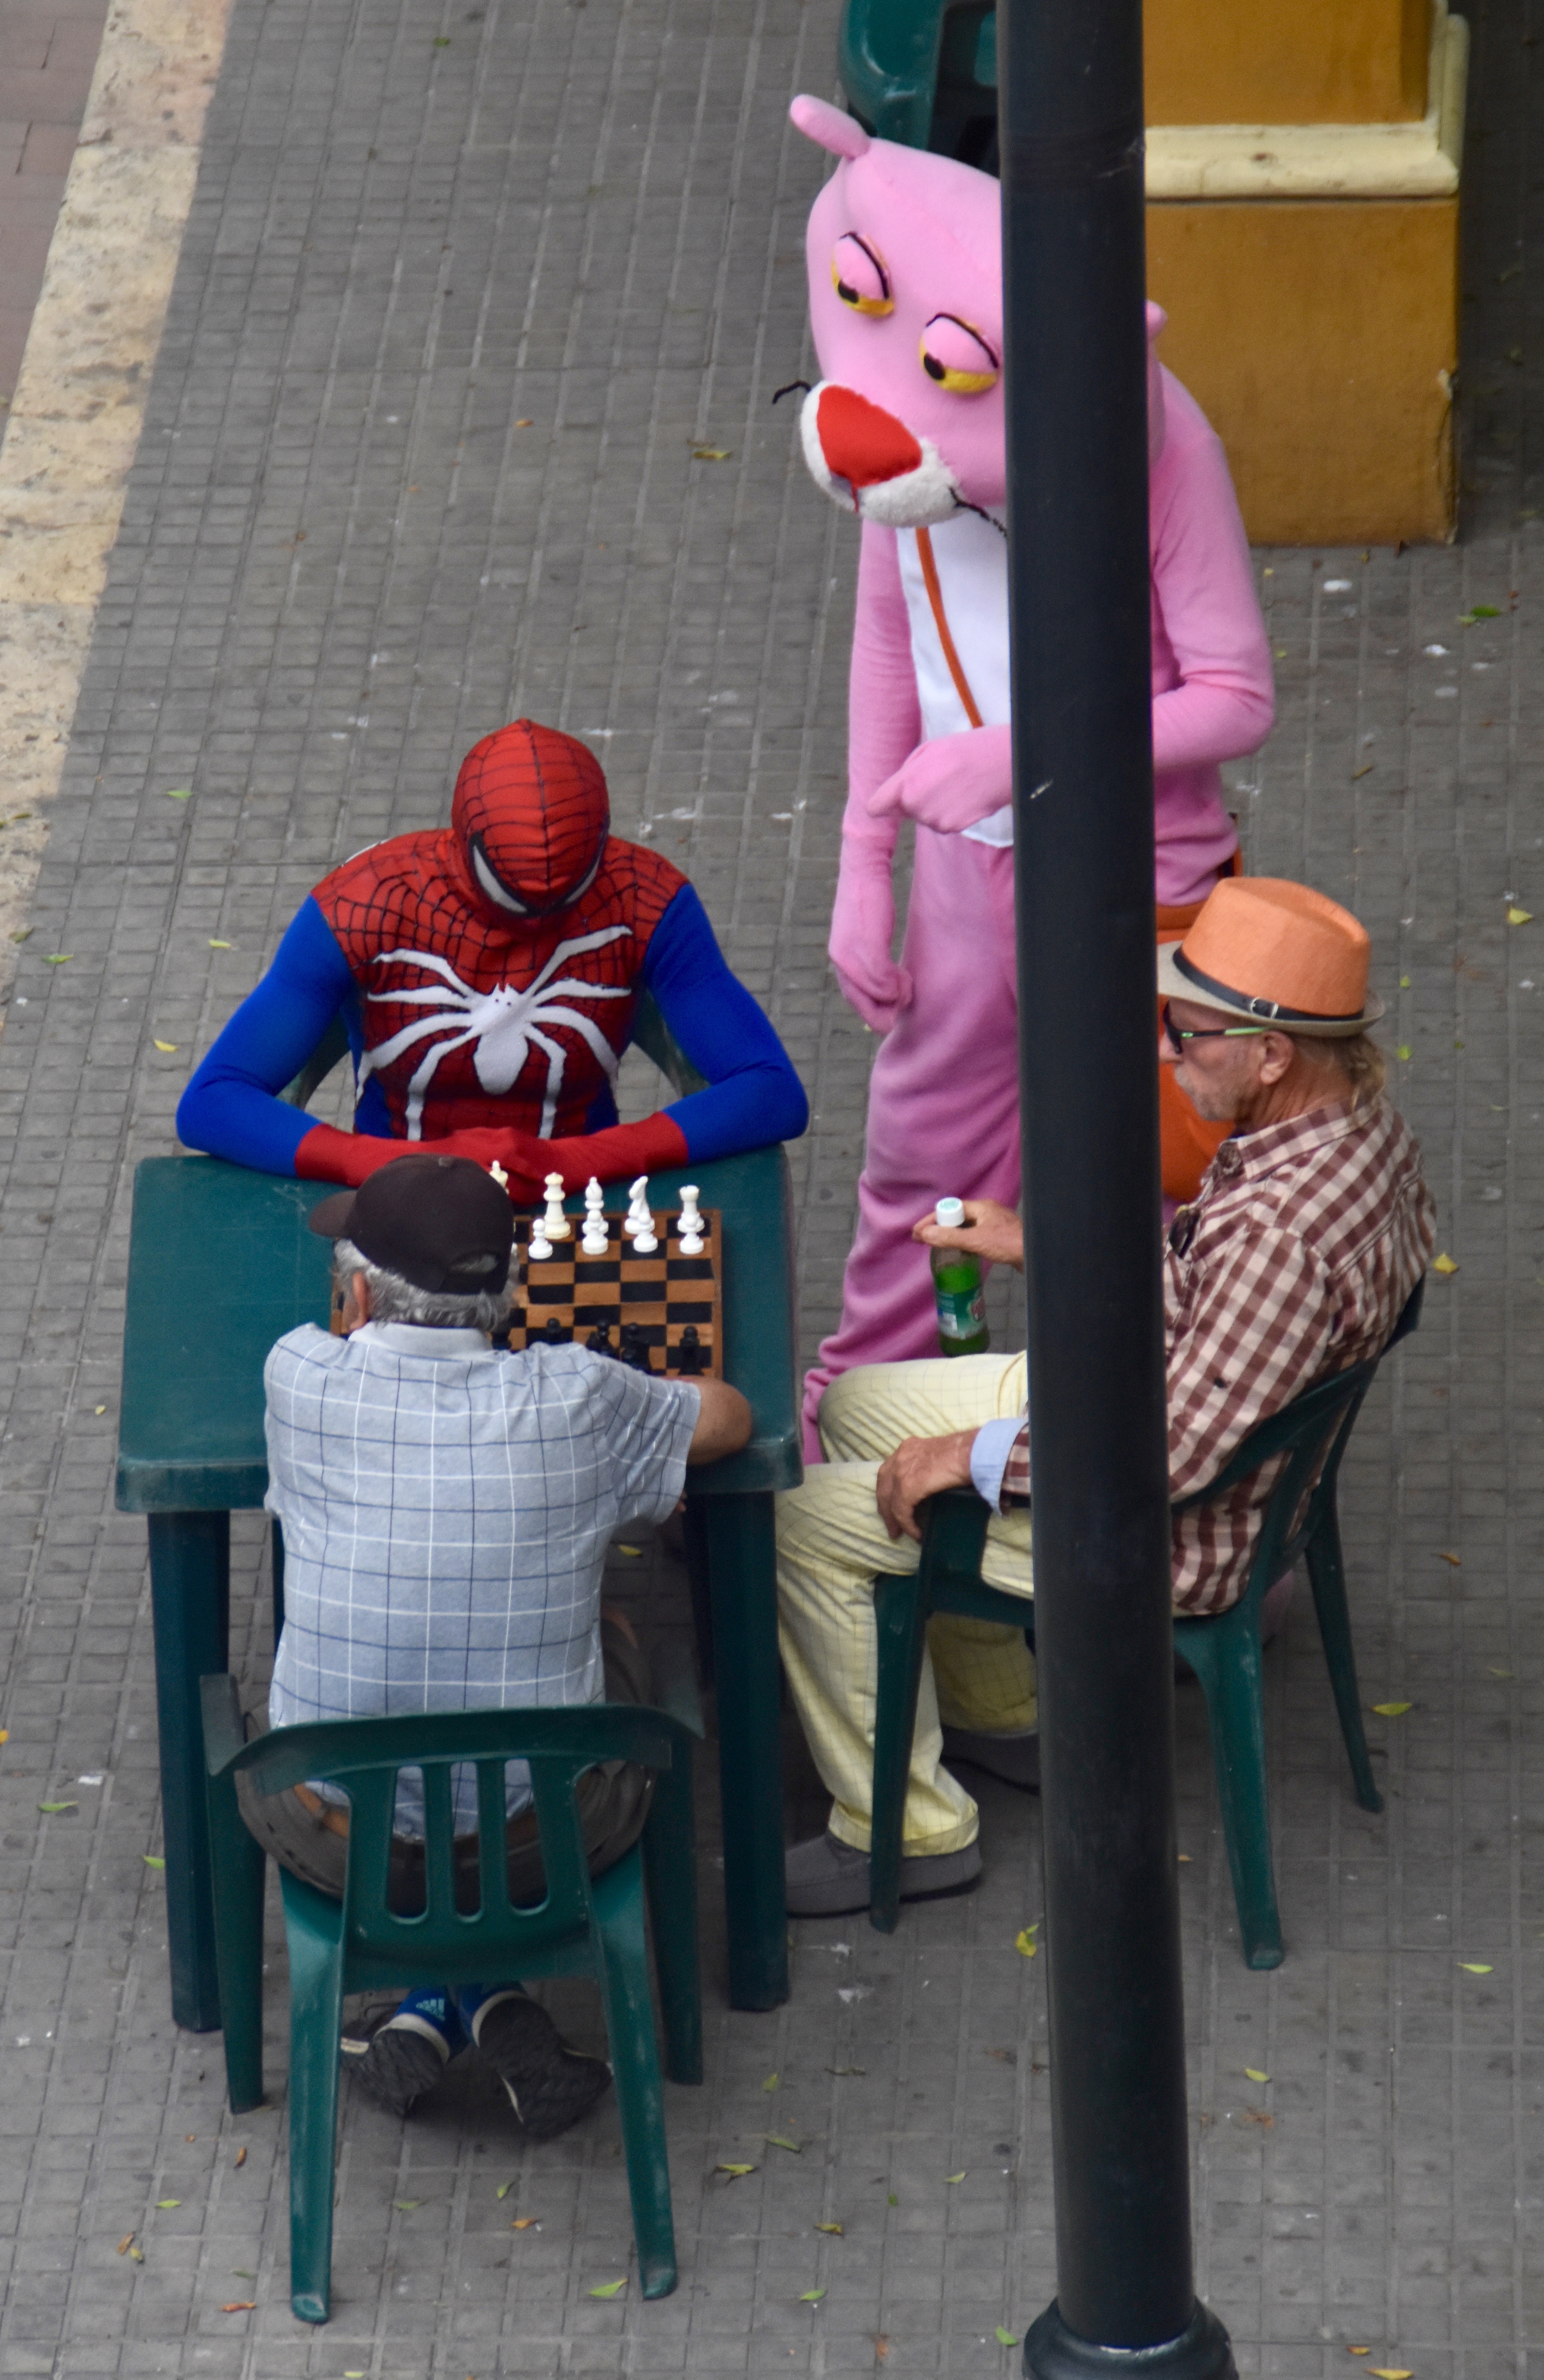 Playing Chess with Spiderman, Cartagena